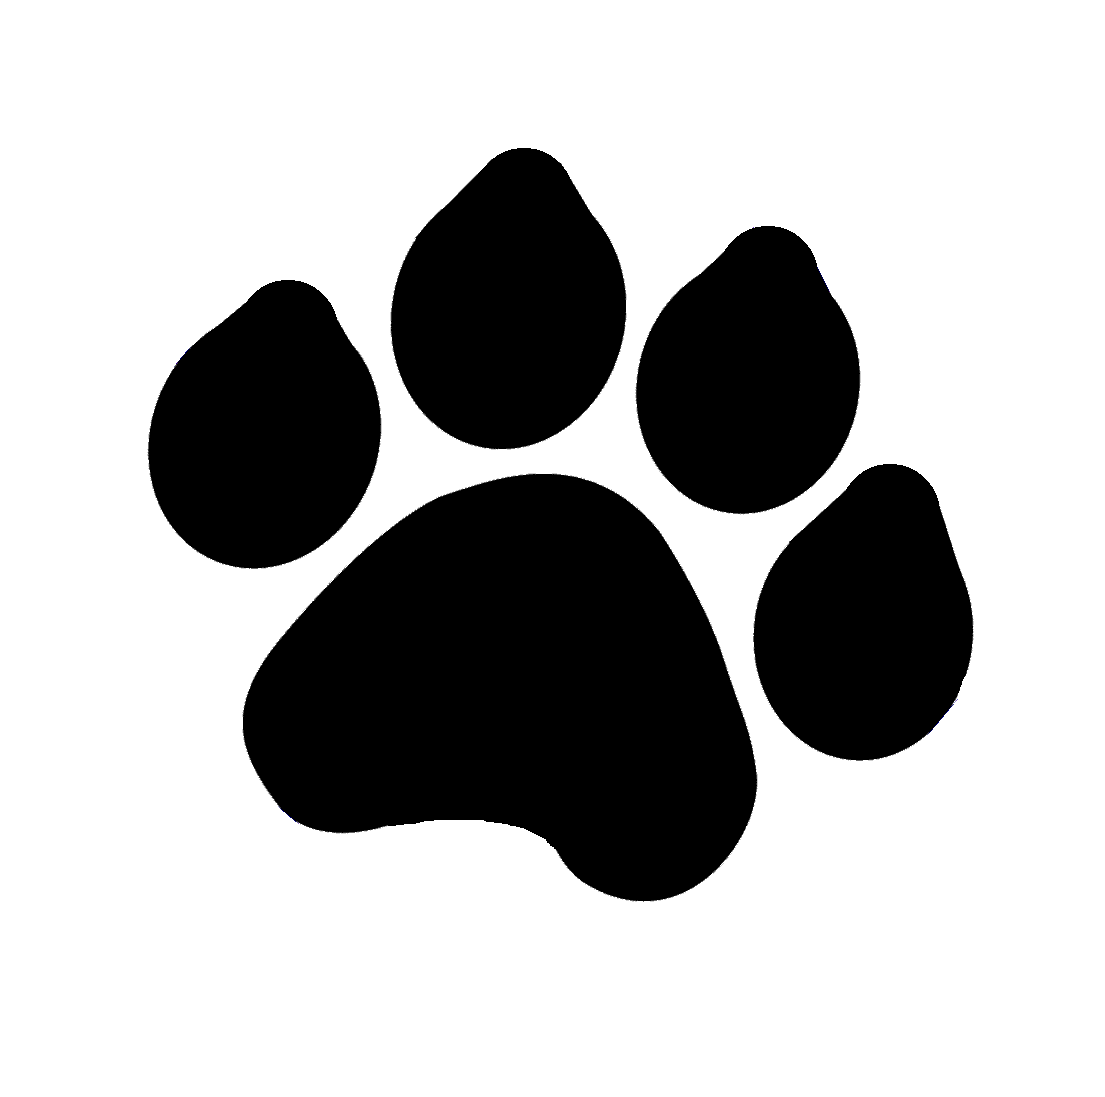 Pictures Of A Paw Print - ClipArt Best